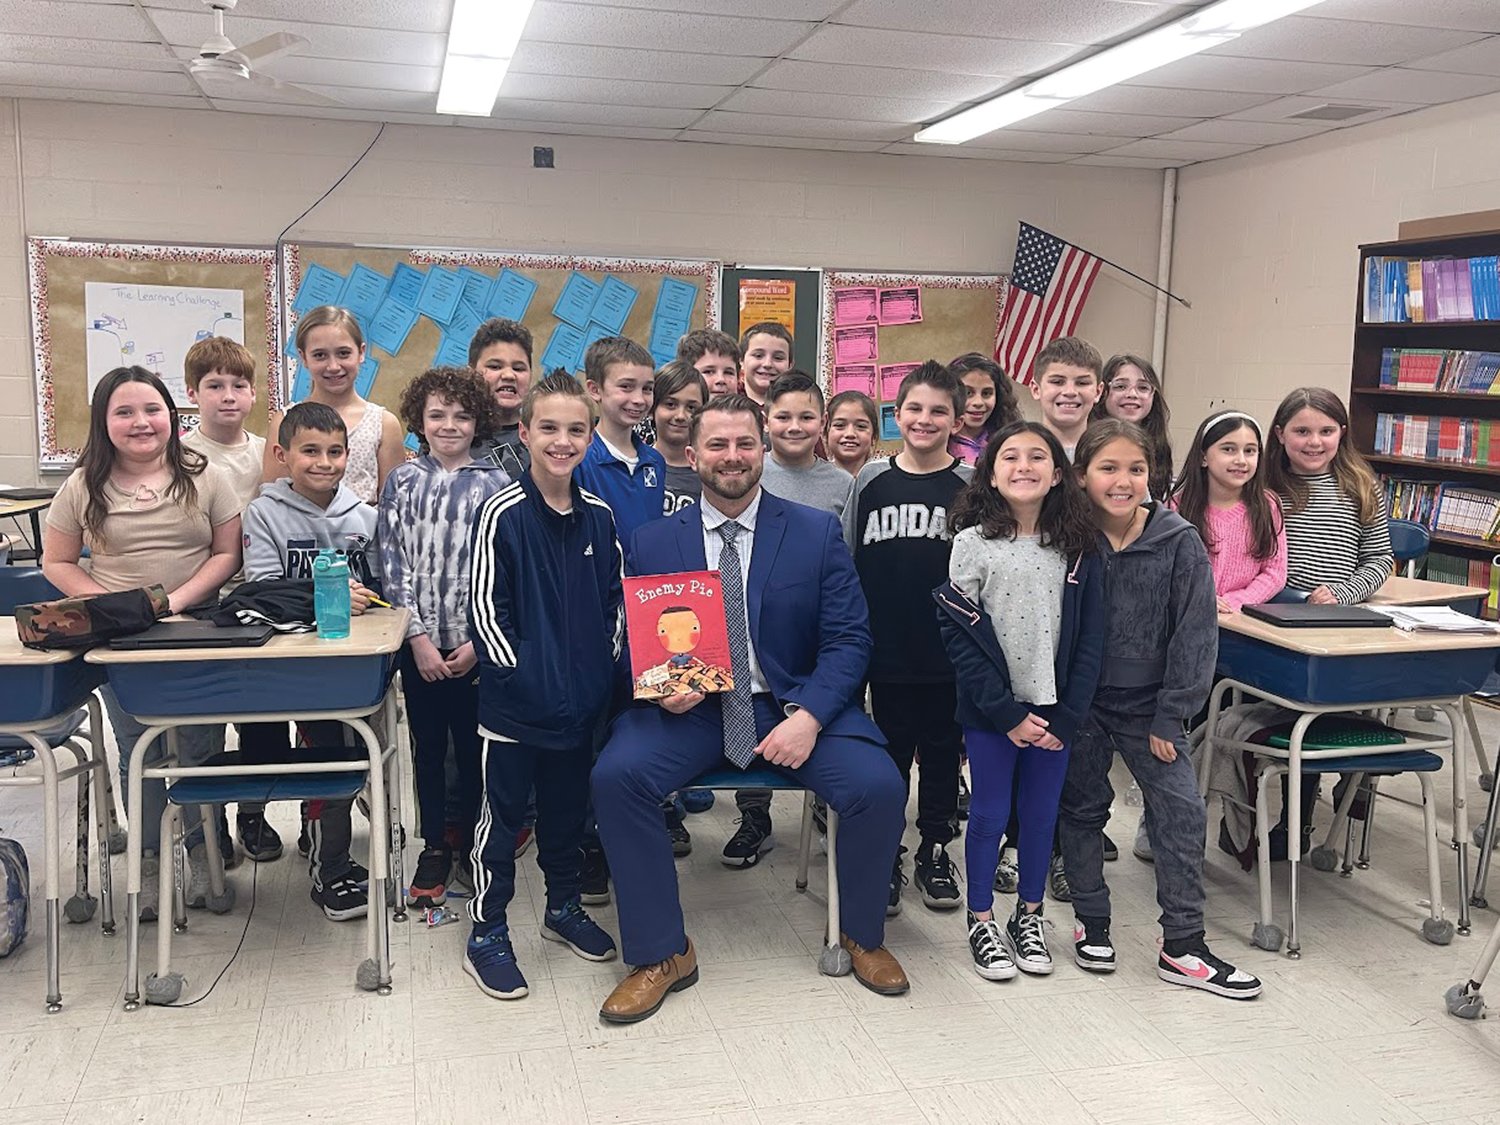 HIGH SCHOOL TRAINING: Now former Johnston High School's Assistant Principal Matthew Velino, who has been promoted to the JHS’s top administrative post, Principal, visited third grade students for Read Across America. He read the book, “Enemy Pie” by Derek Munson.